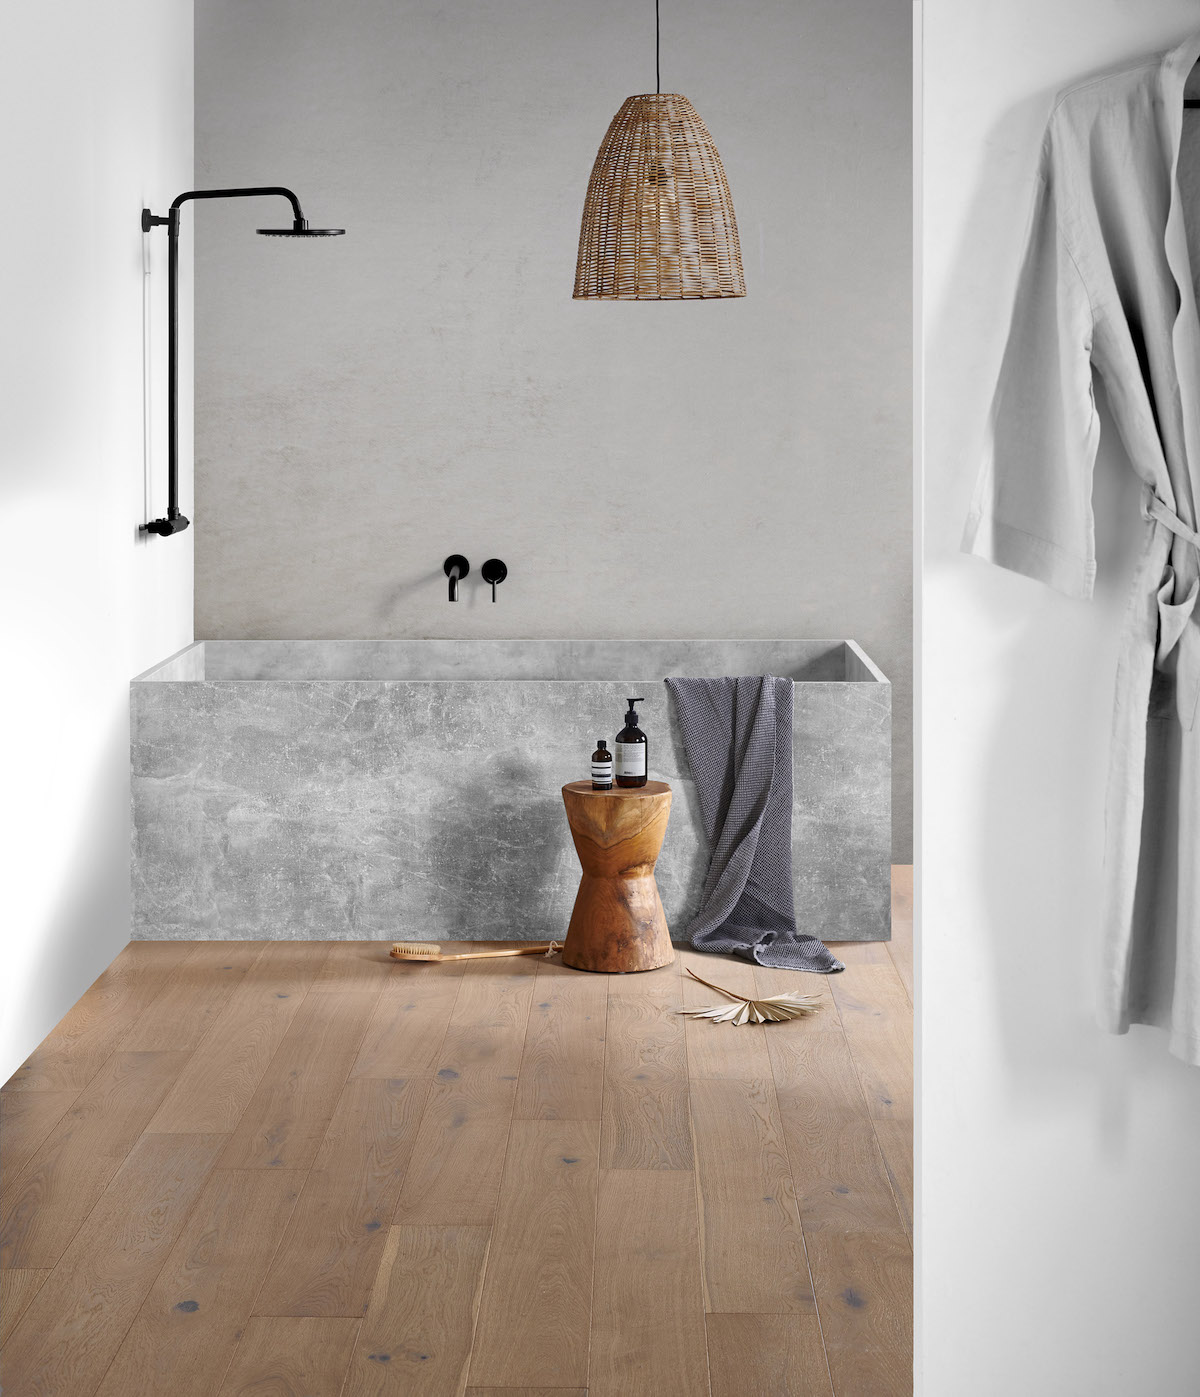 Image caption: Featuring a real wood top layer, this bathroom flooring, our Woodpecker Lynton in Seagrass Oak from the Stratex collection, features a waterproof finish. | Image credit: Hyperion Tiles